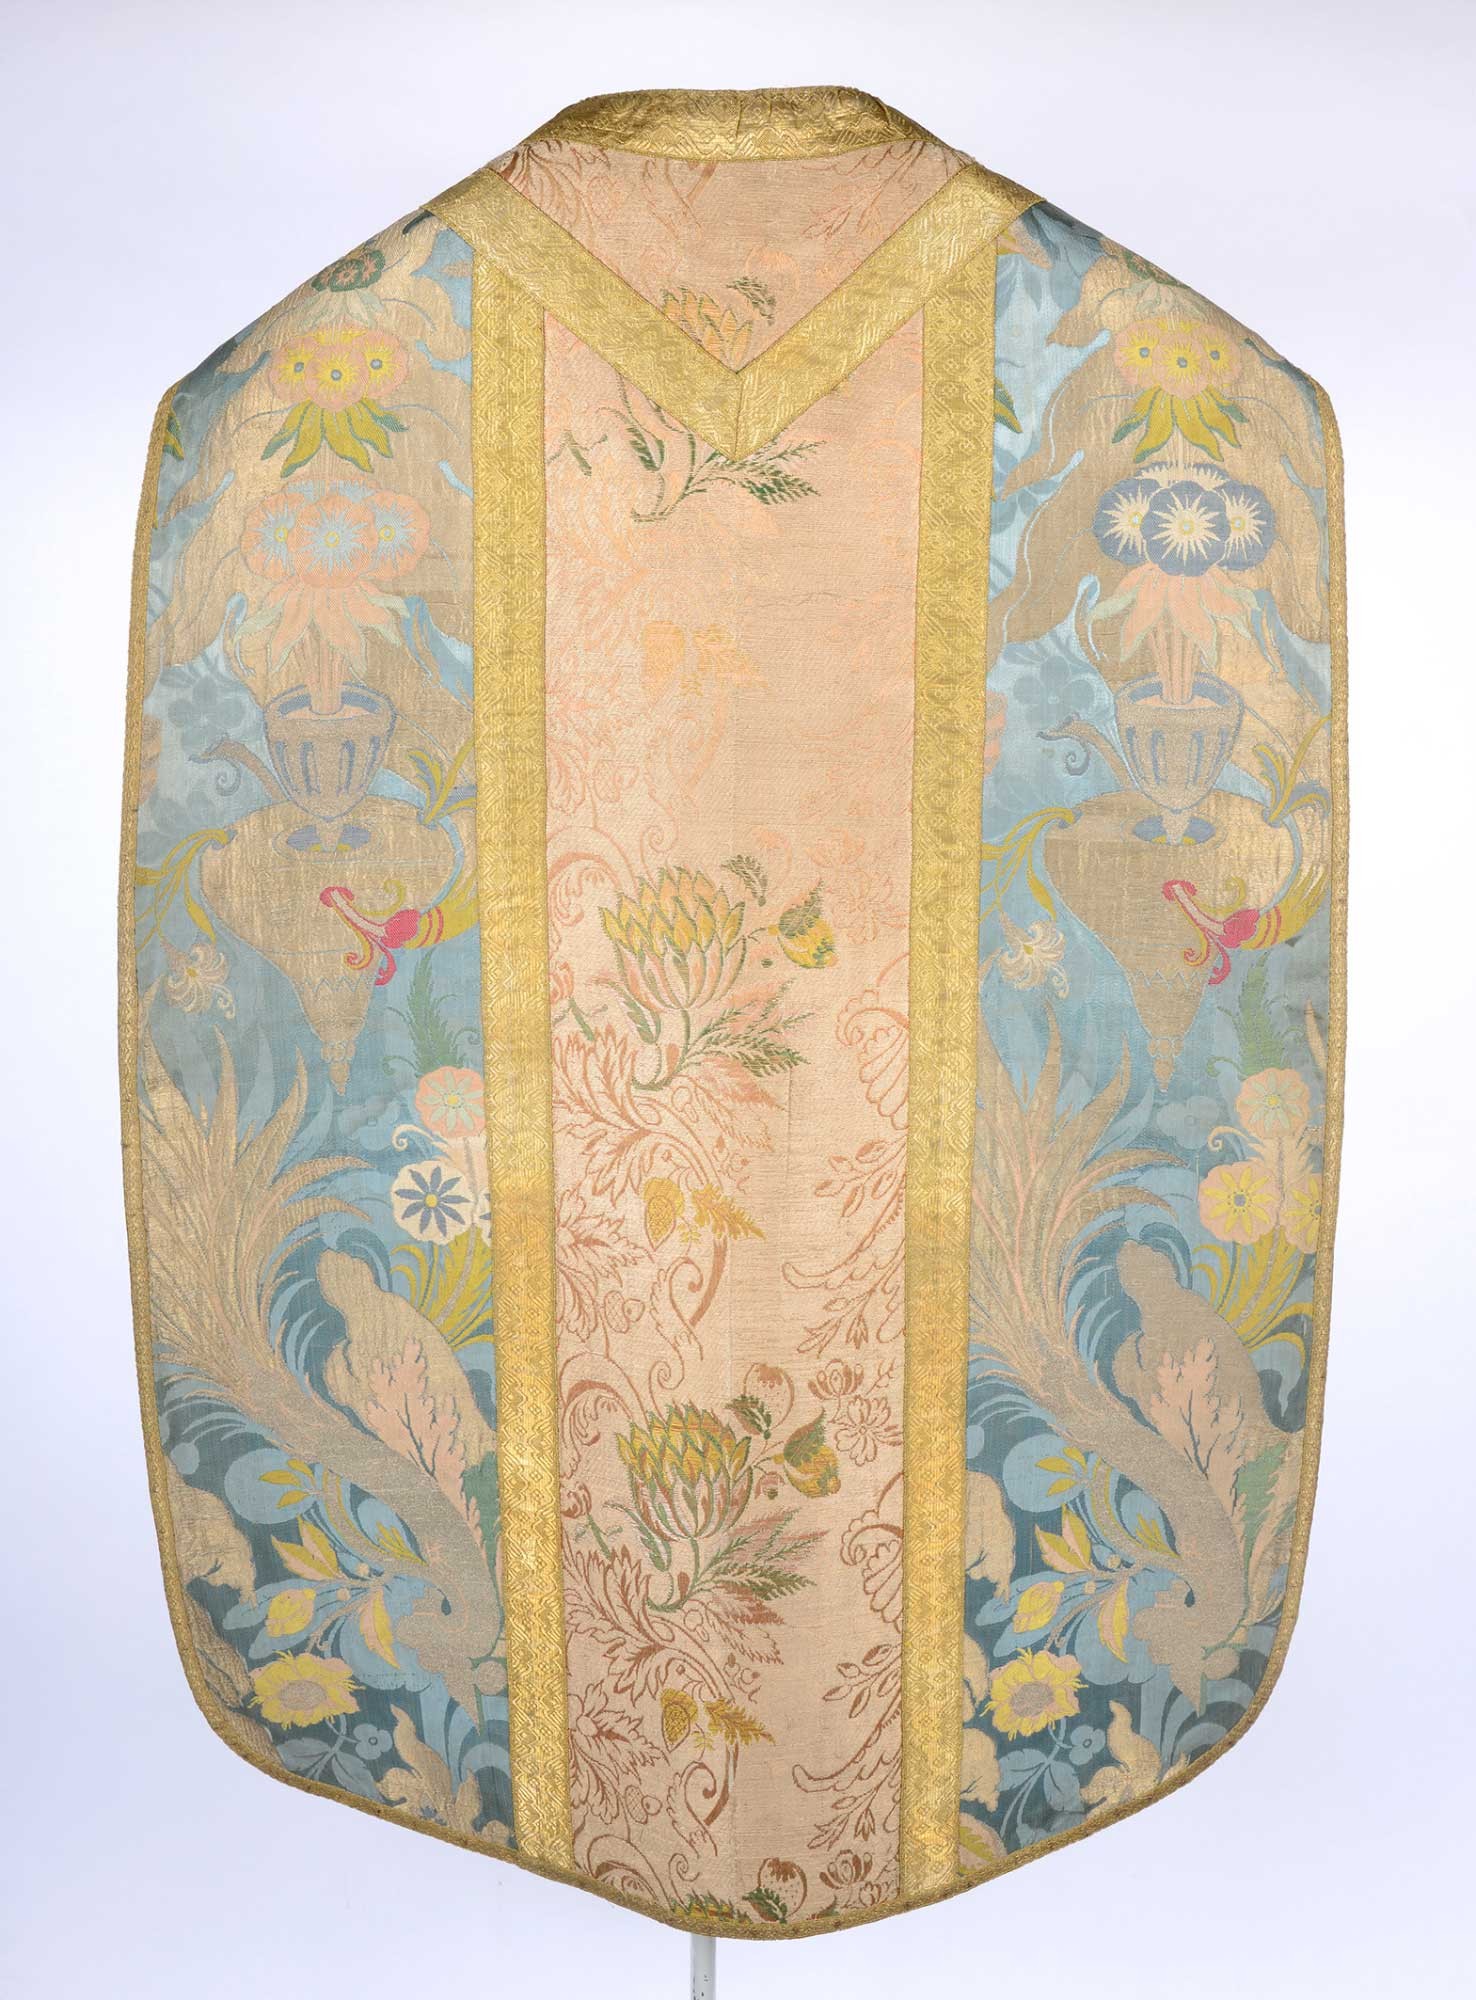 Chasuble made of two reused textiles: one blue with floral patterns of the “bizarre silk” type and one pale pink silk fabric with gold edging